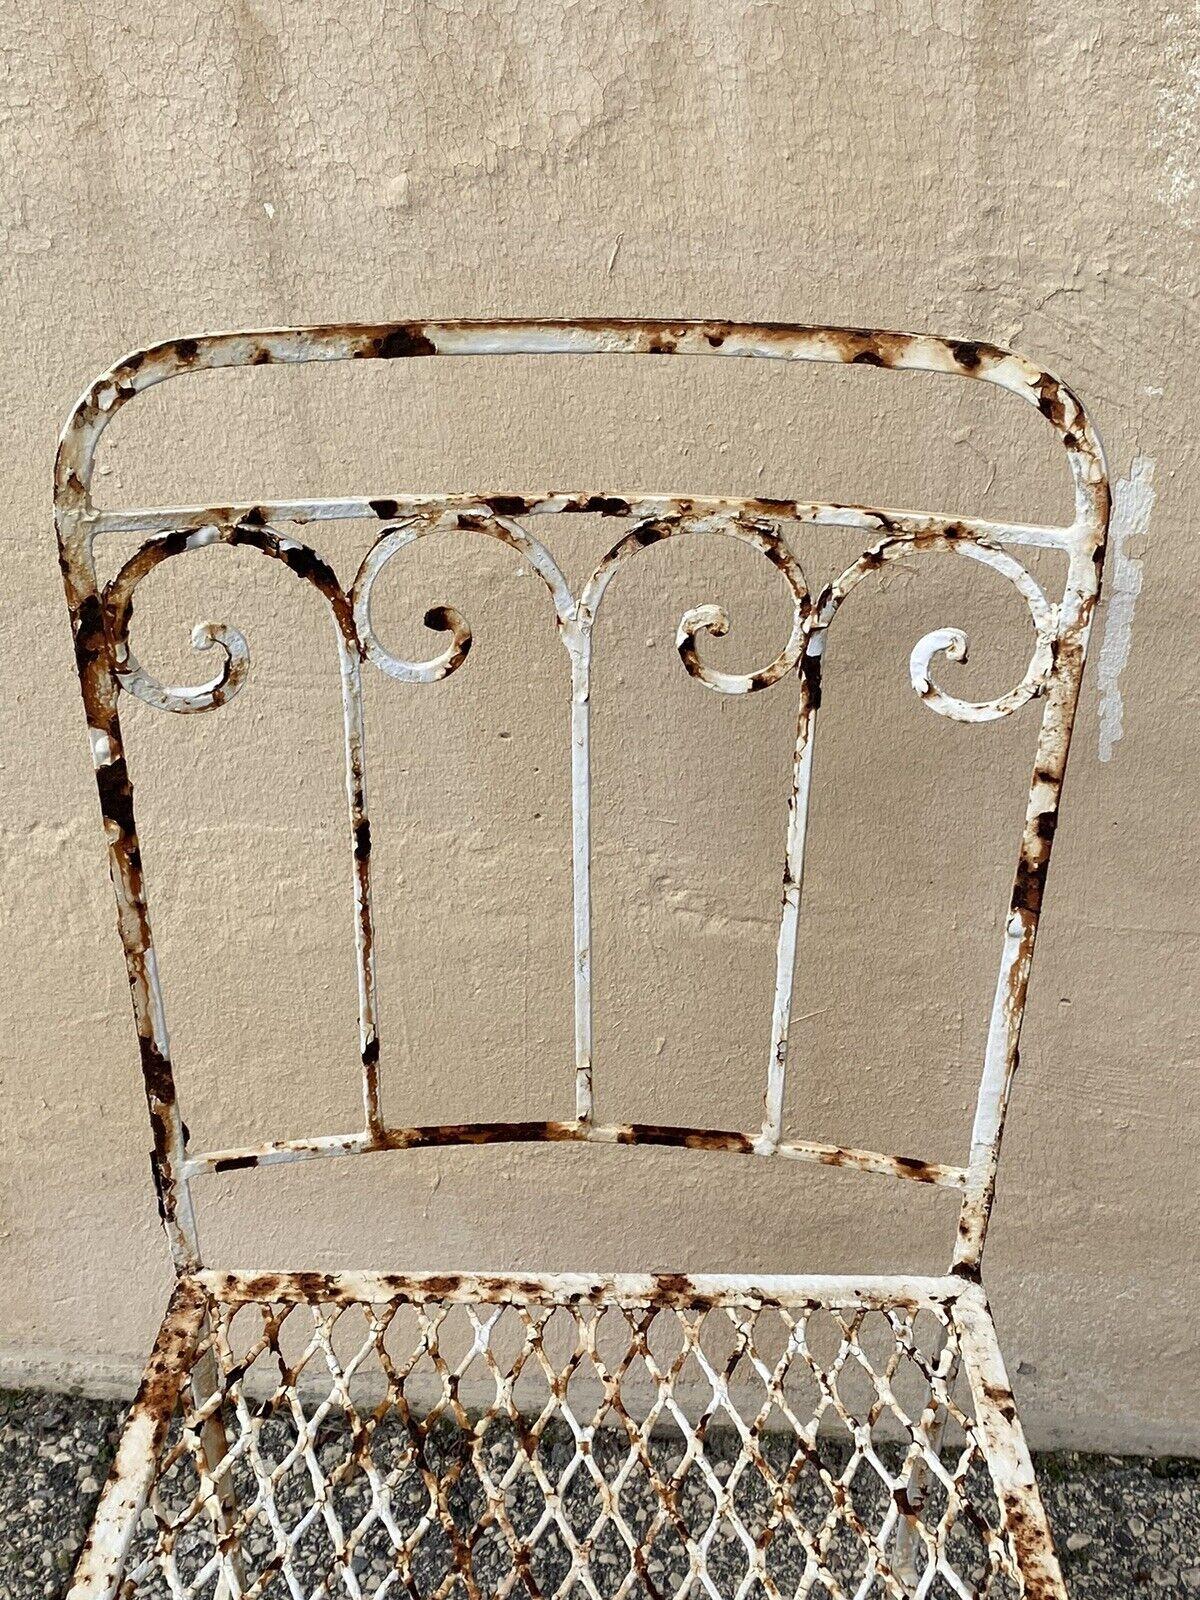 Antique Art Nouveau Scrolling Wrought Iron Garden Patio Dining Chairs - A Pair For Sale 2